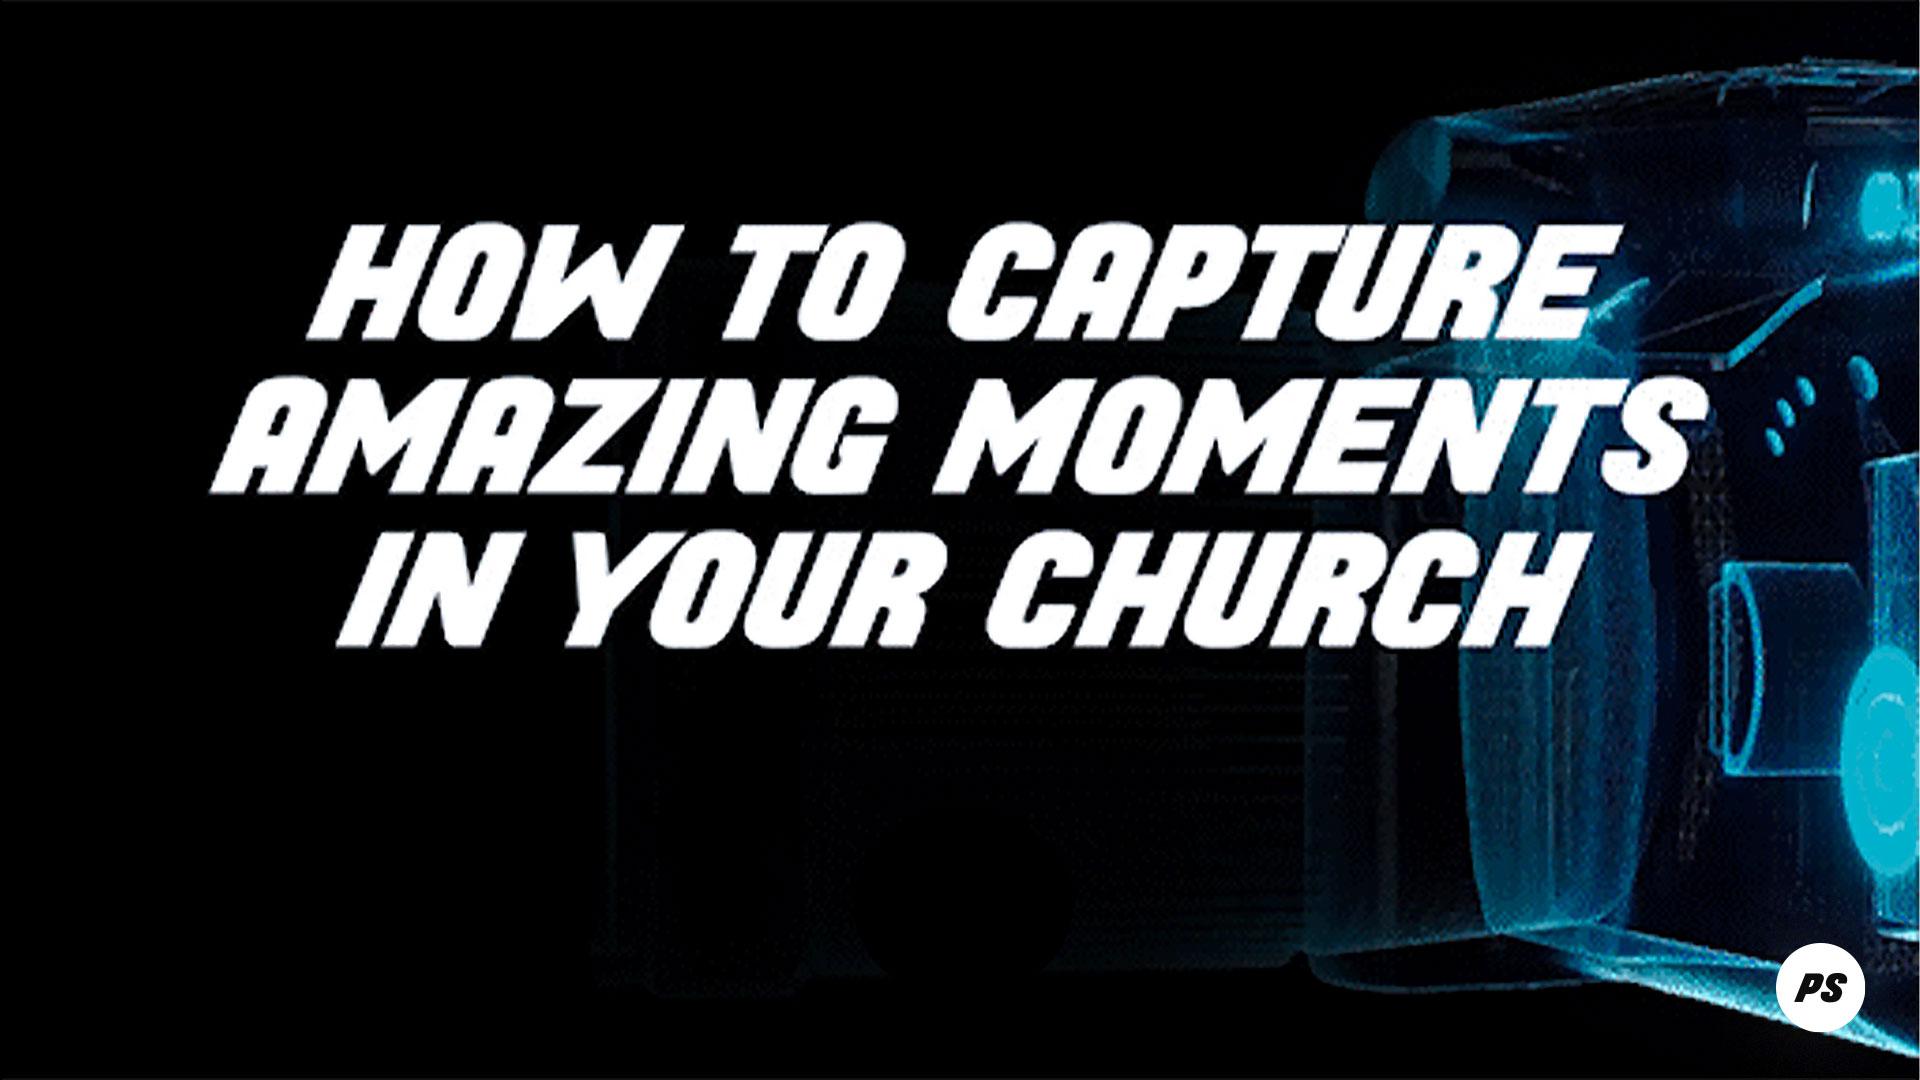 Featured Image for “How to capture amazing moments in your church”